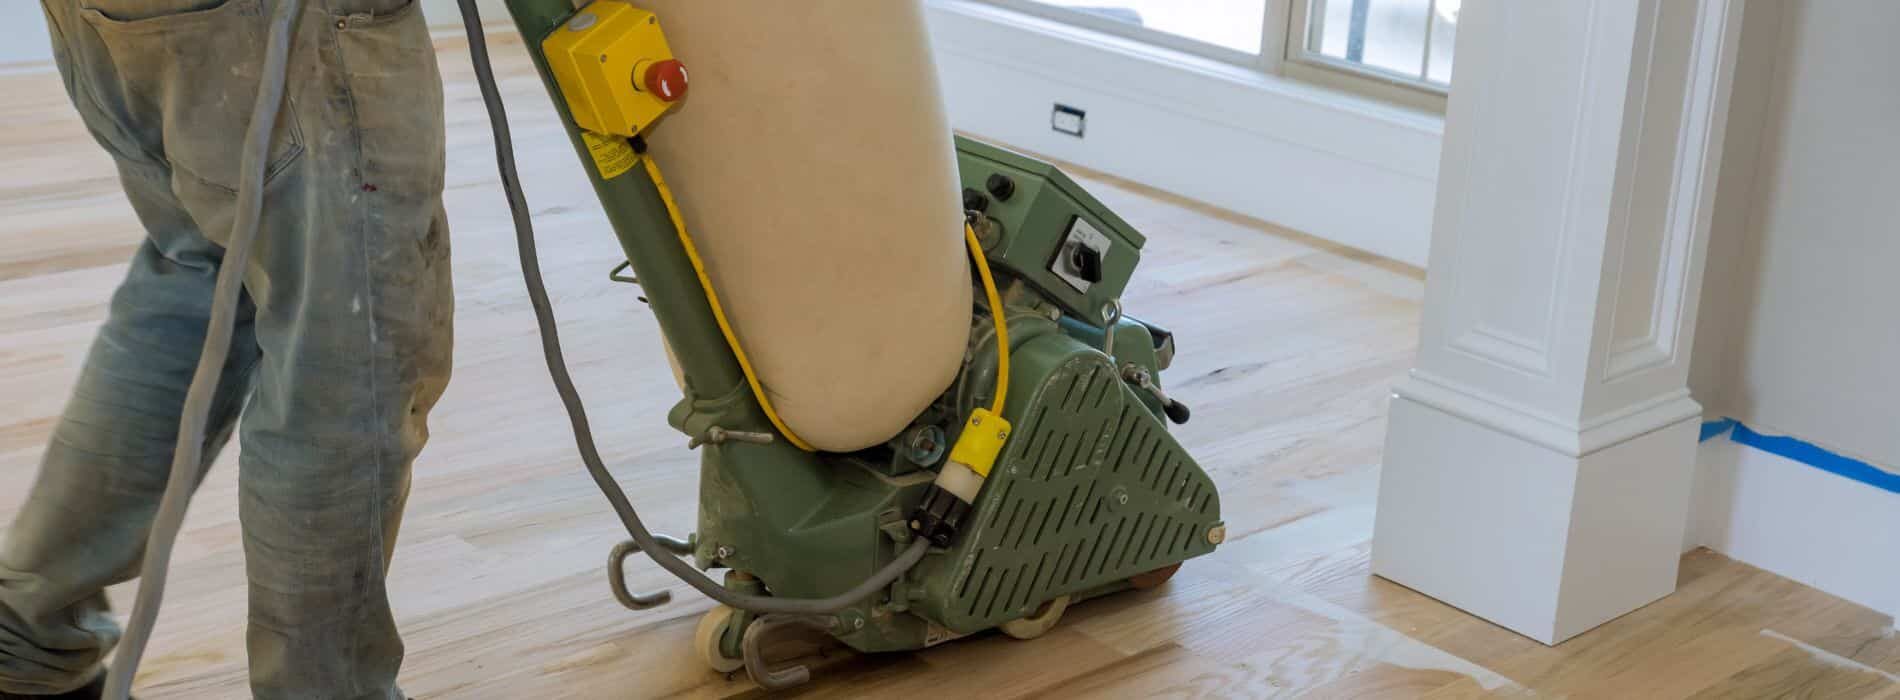 In Belvedere, DA17, Mr Sander® are using a Bona Scorpion, a 200mm drum sander, to sand a herringbone floor. This powerful machine operates at 1.5 kW and requires a voltage of 240V and a frequency of 50Hz. 